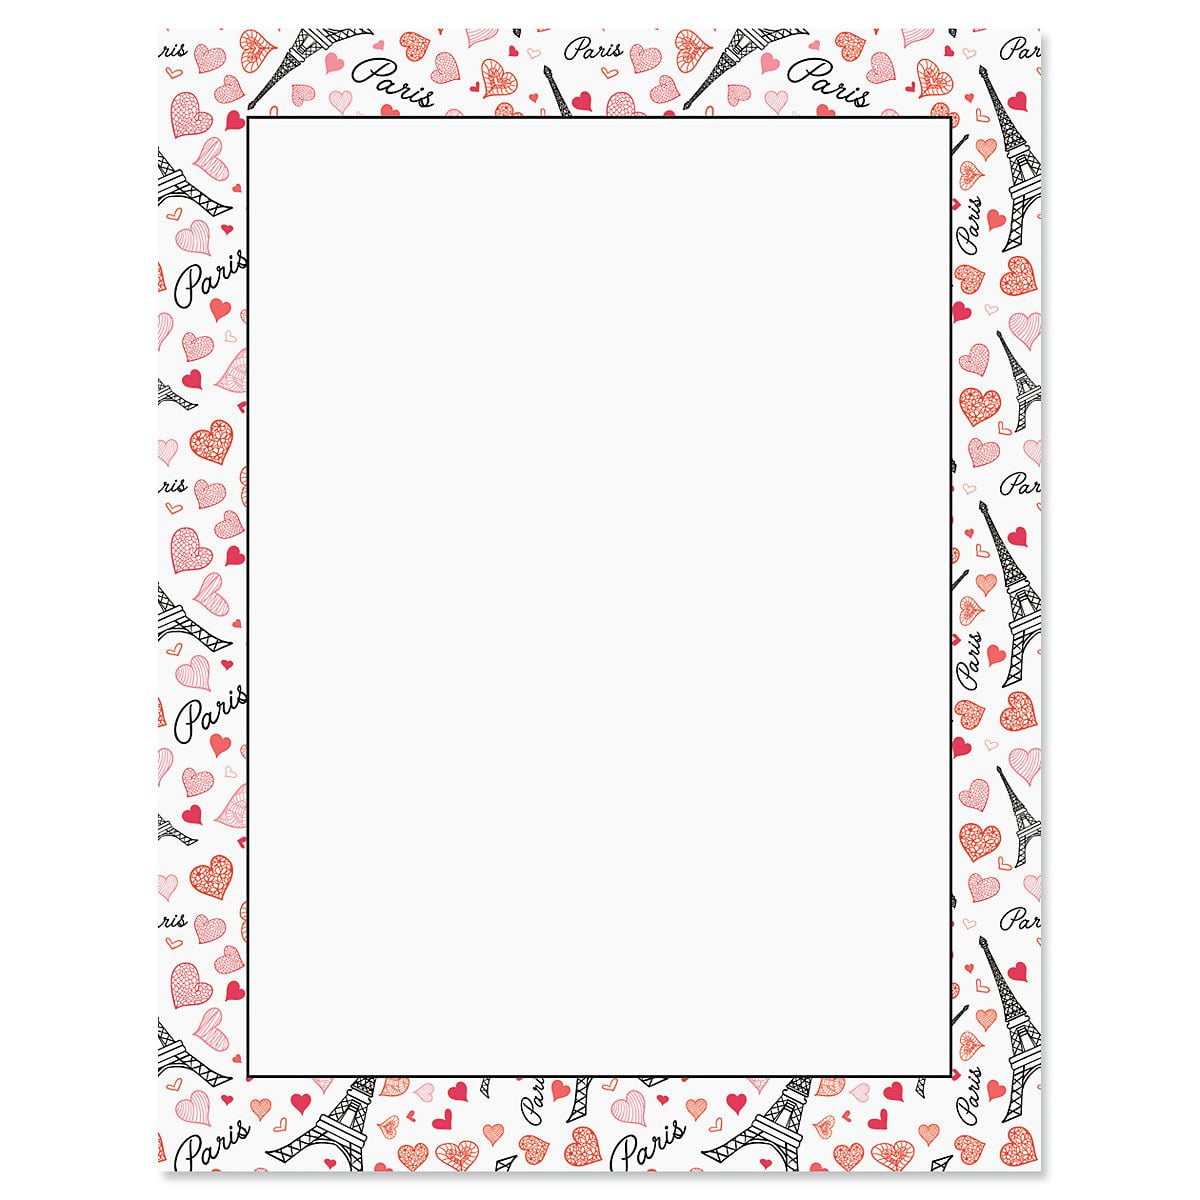 Paper Hearts Letter Stationery - Set of 25 Valentine's Day Themed Papers, 8  1/2 x 11, Printer Compatible, Great for Wedding Announcements, Holiday